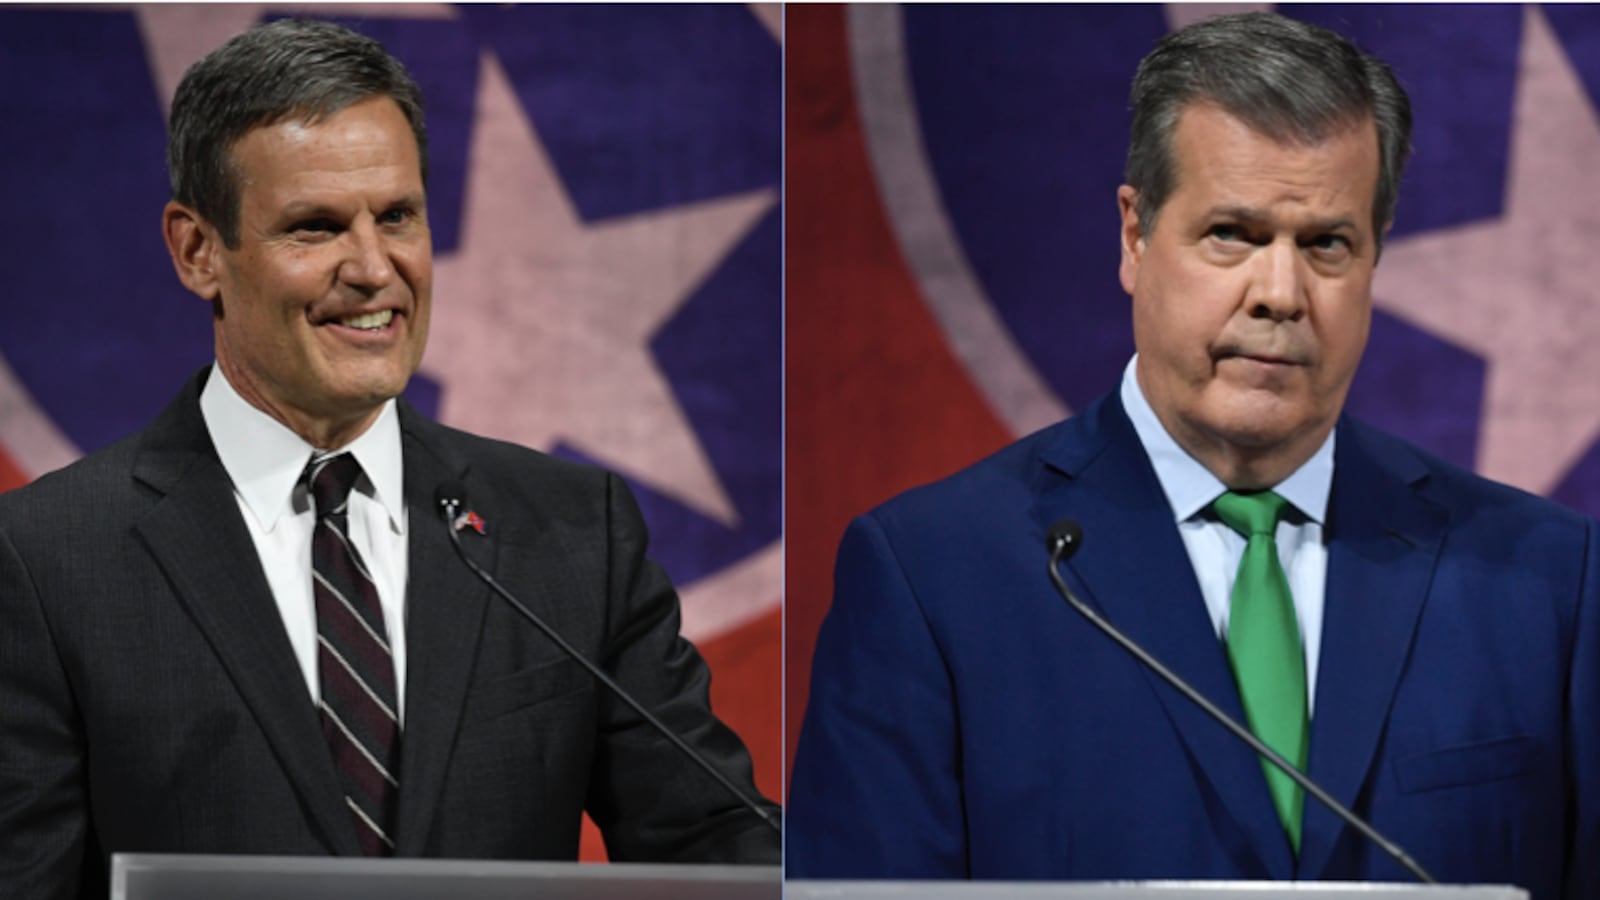 From left: Williamson County businessman Bill Lee and former Nashville Mayor Karl Dean will face off in the general election Nov. 6 to become Tennessee's 50th governor.